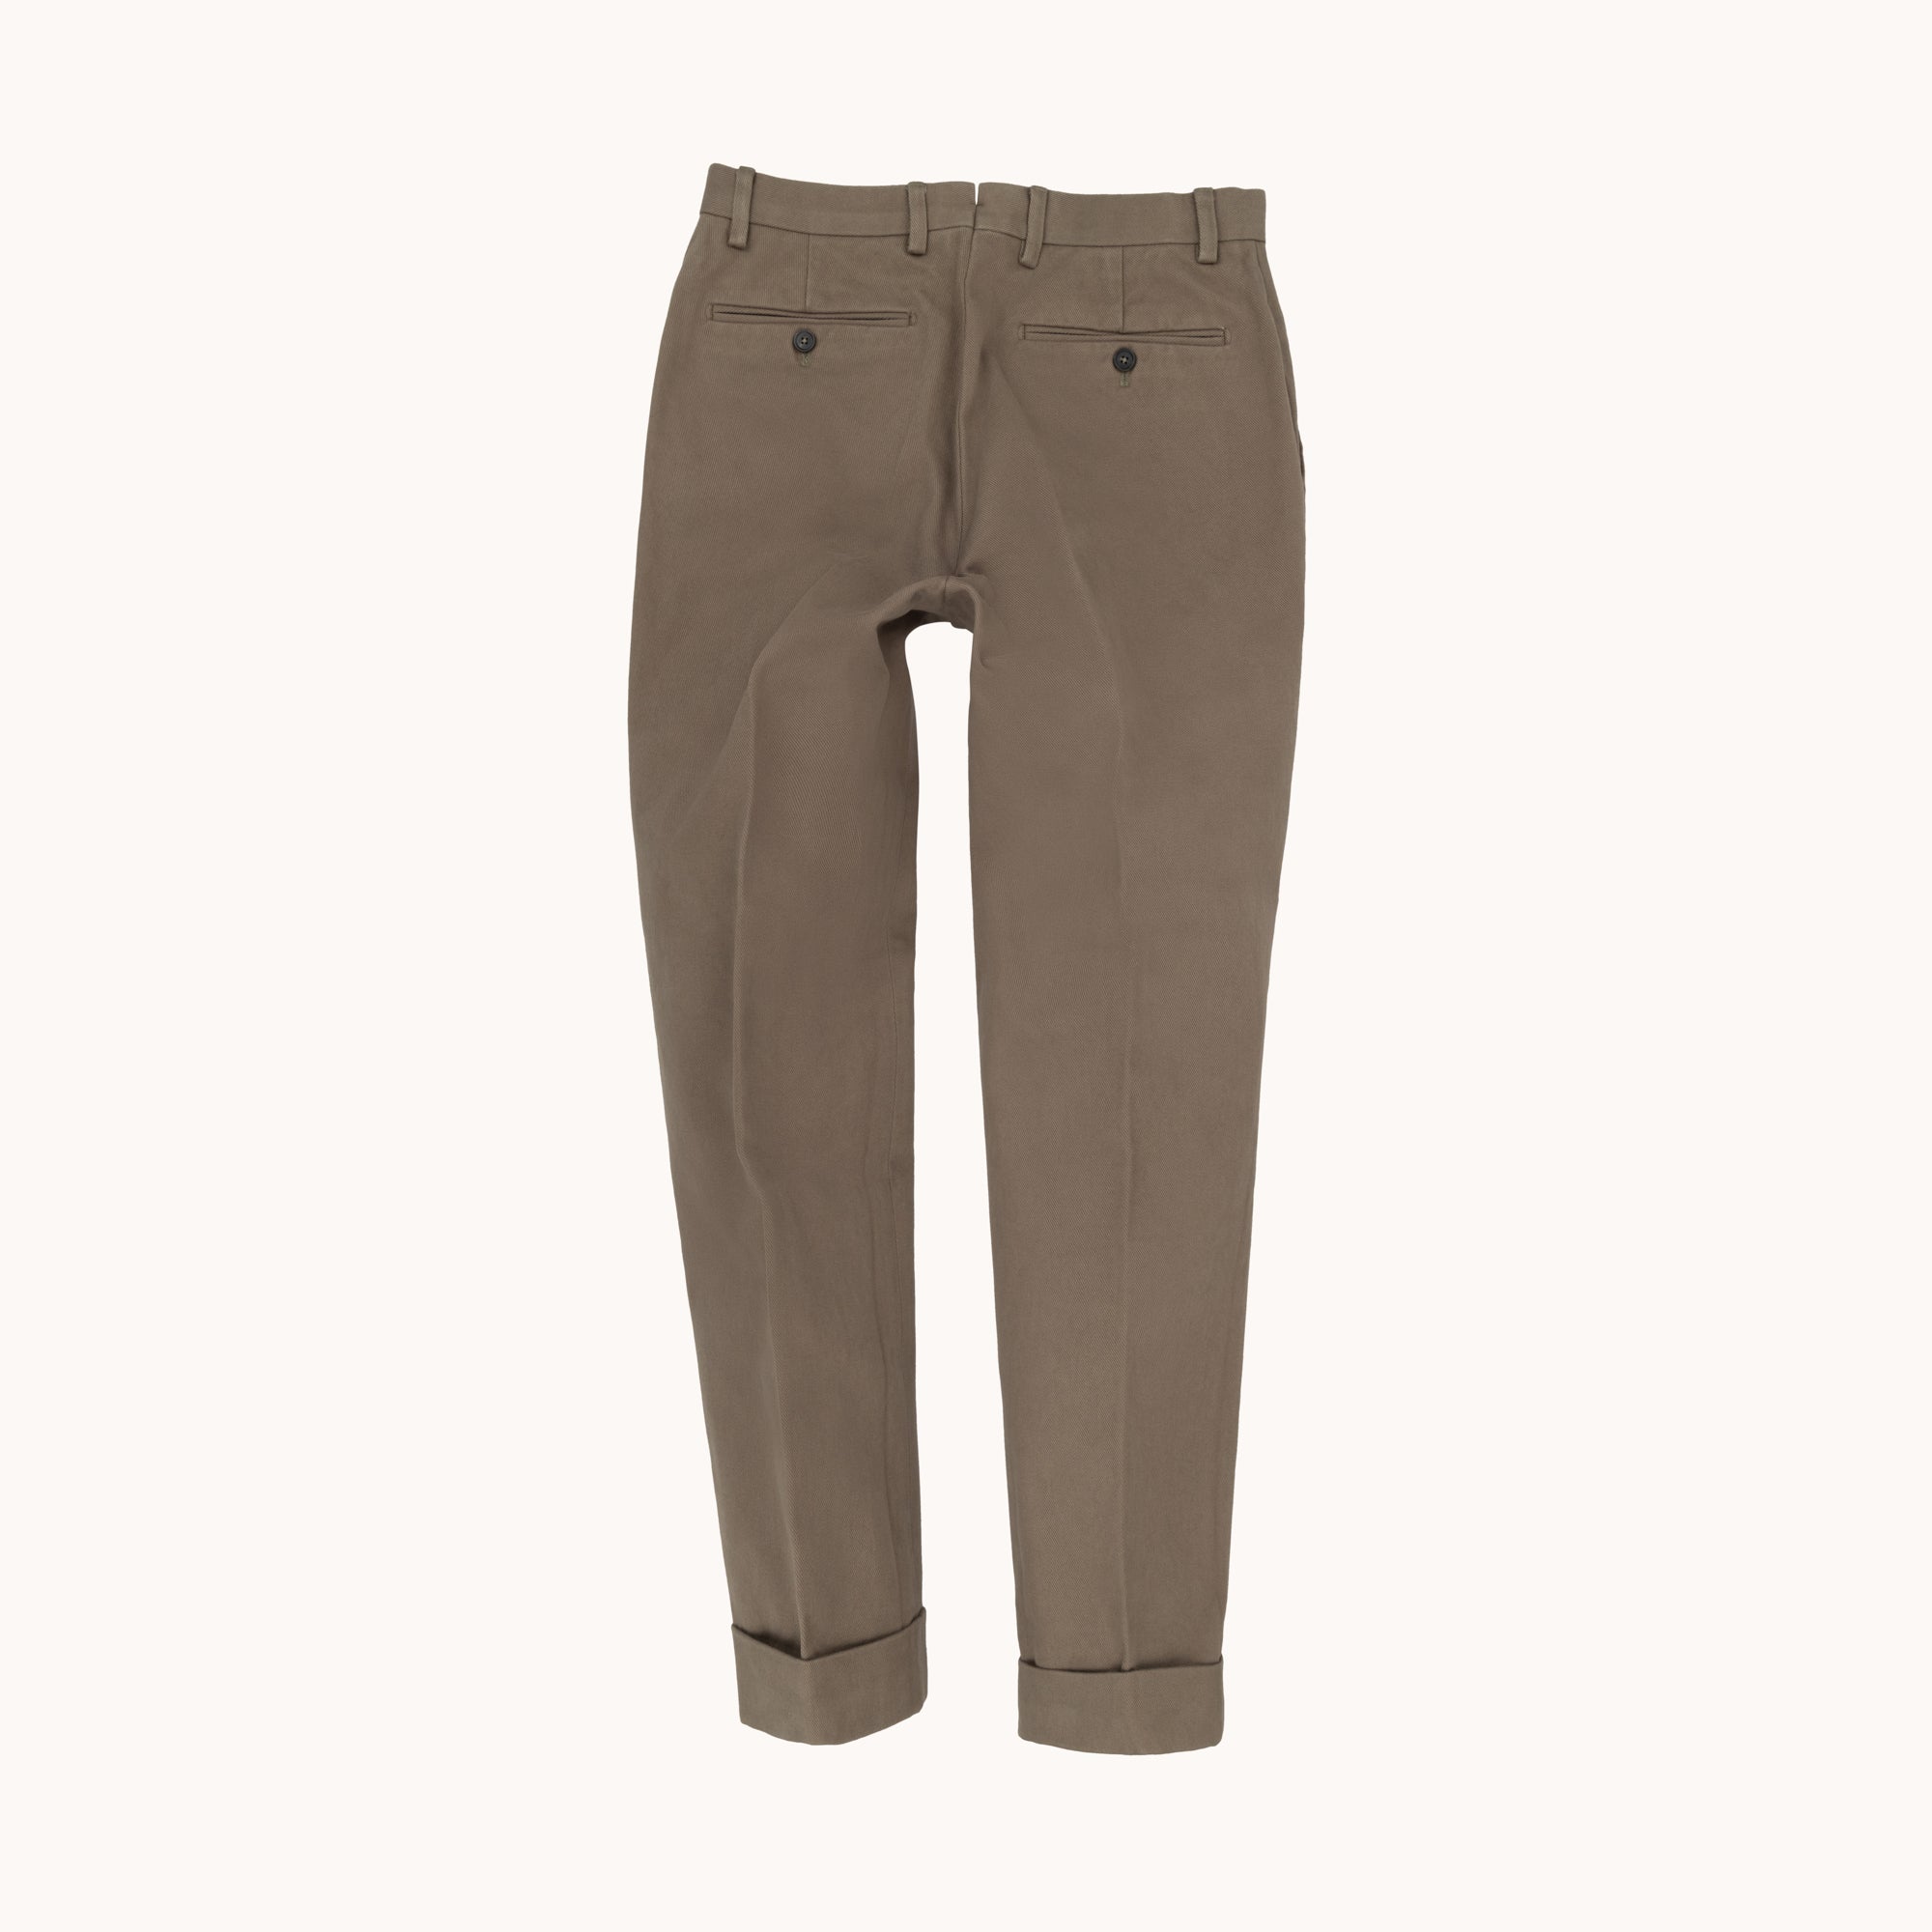 Garment Washed Flat Front Trouser - Lovat Cotton Drill